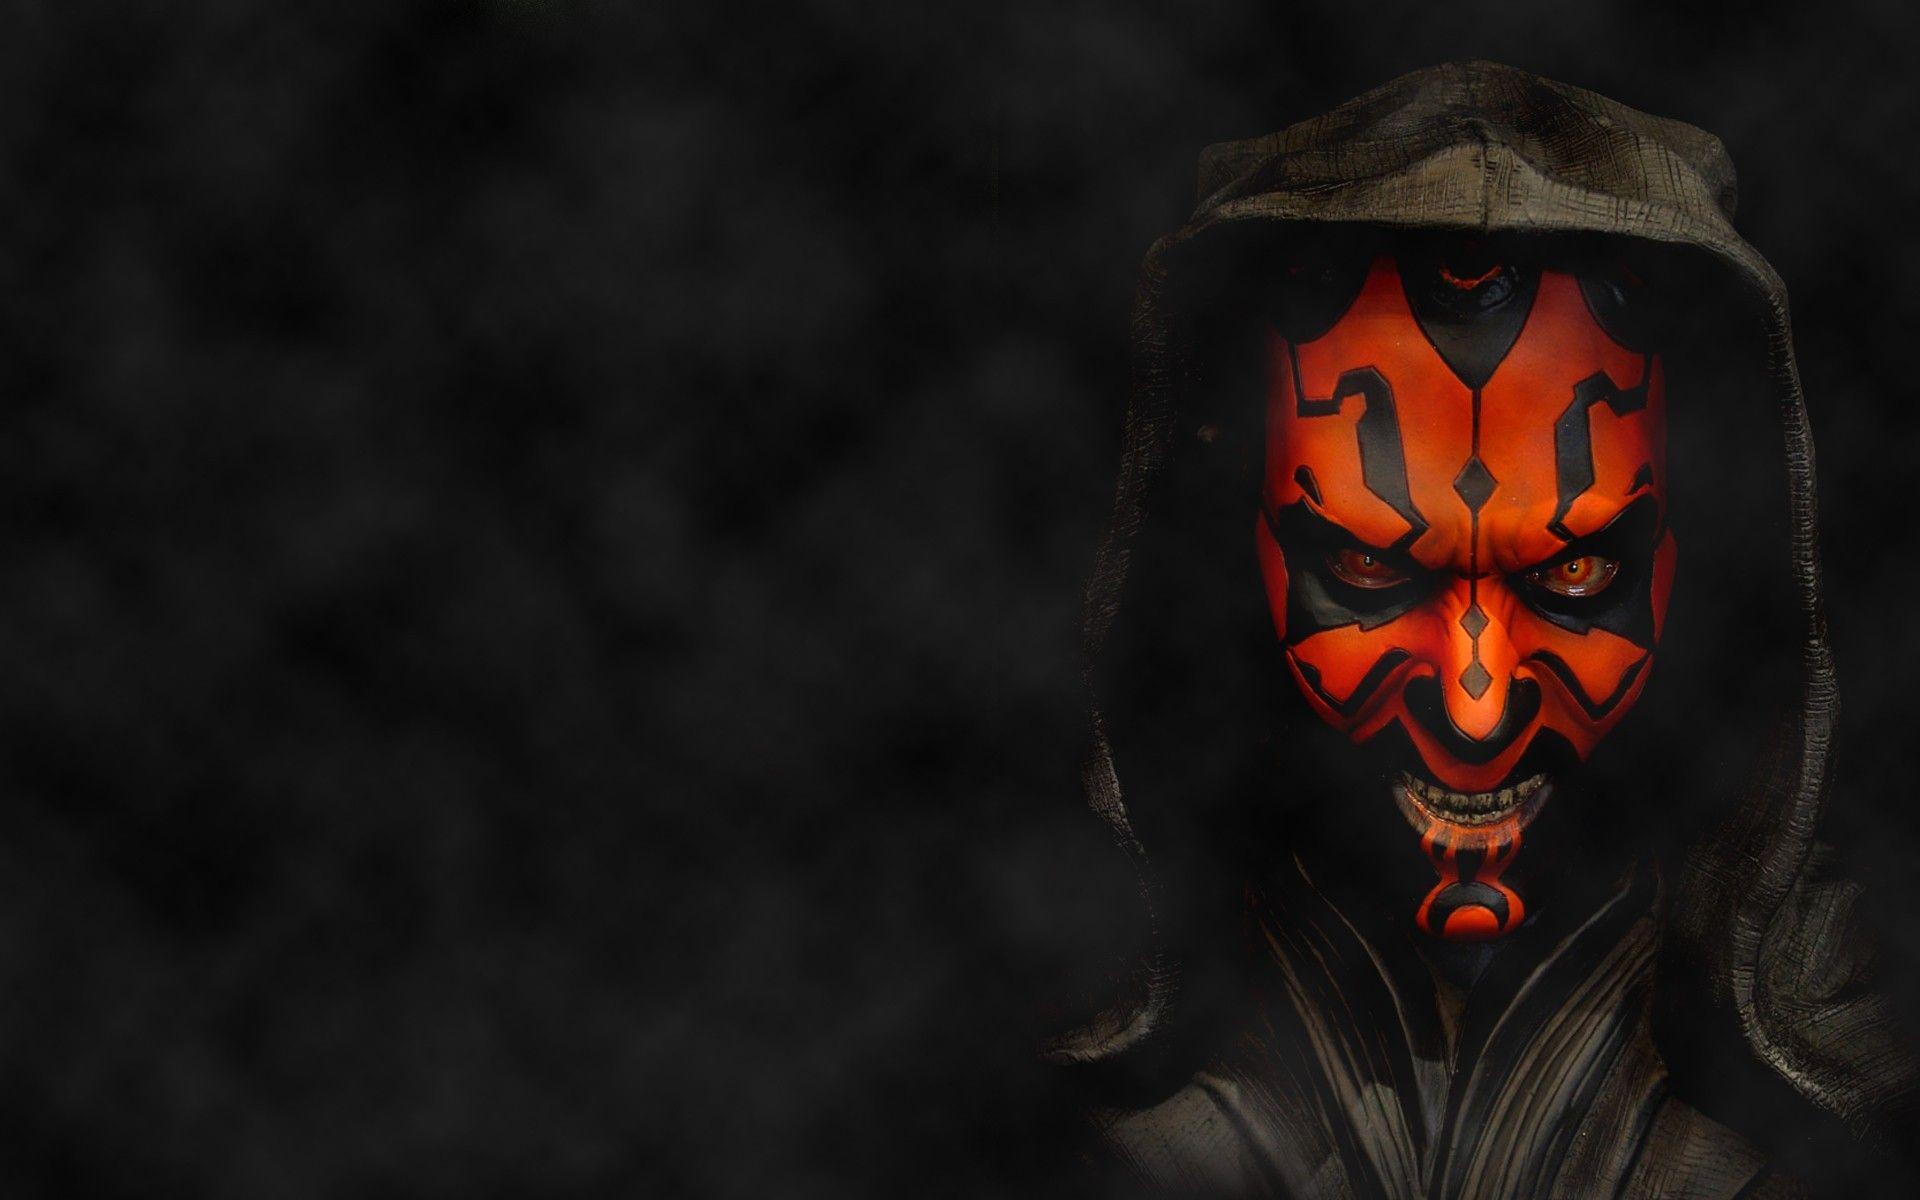 Sith wallpaperDownload free amazing full HD background